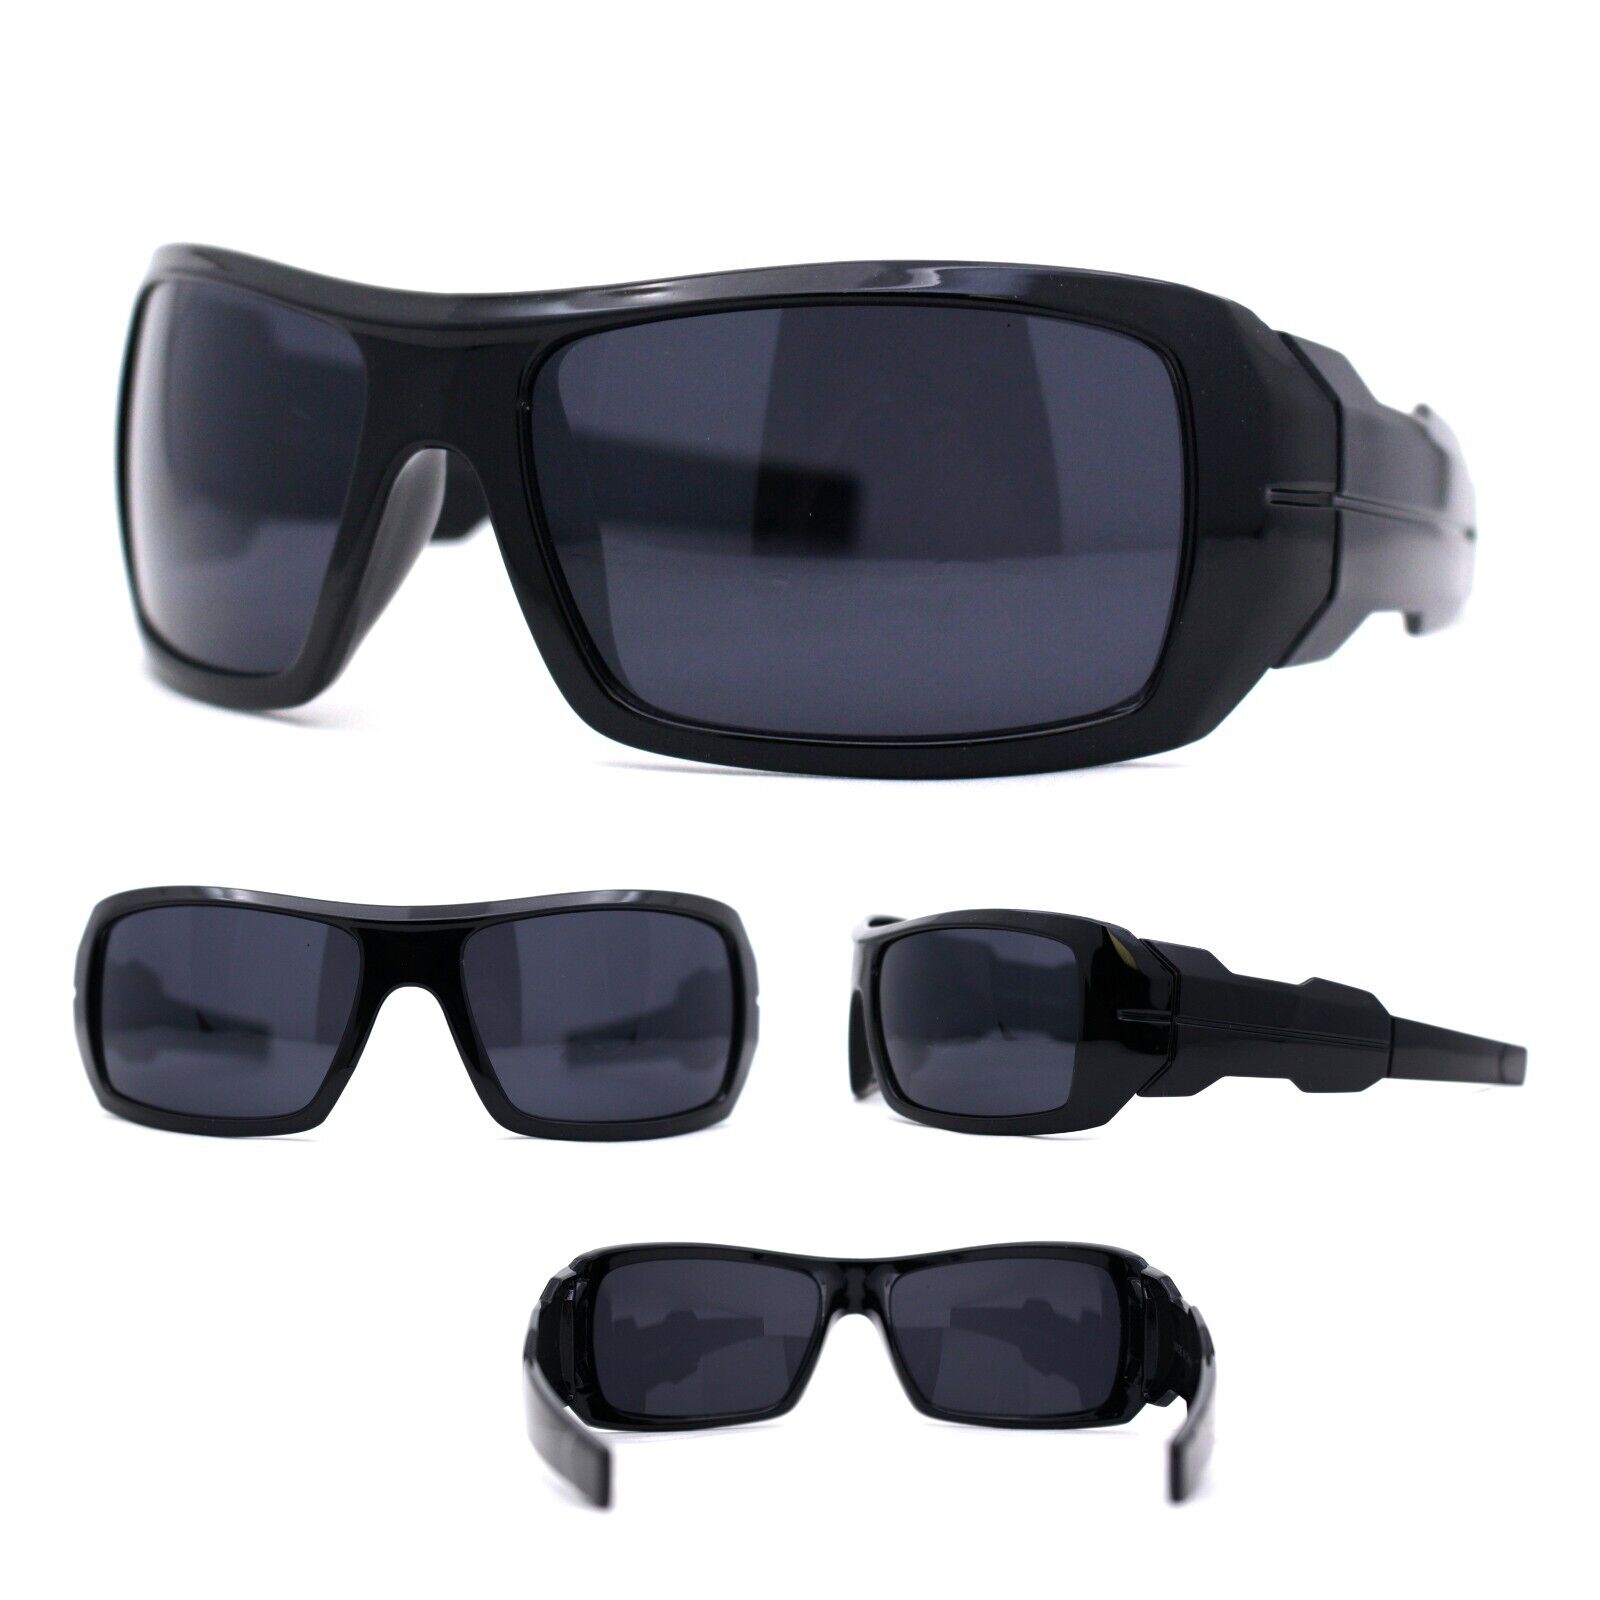 Shop Marc Jacobs Dark Grey Shaded Flat Top Sunglasses for Women from  MyRunway.co.za